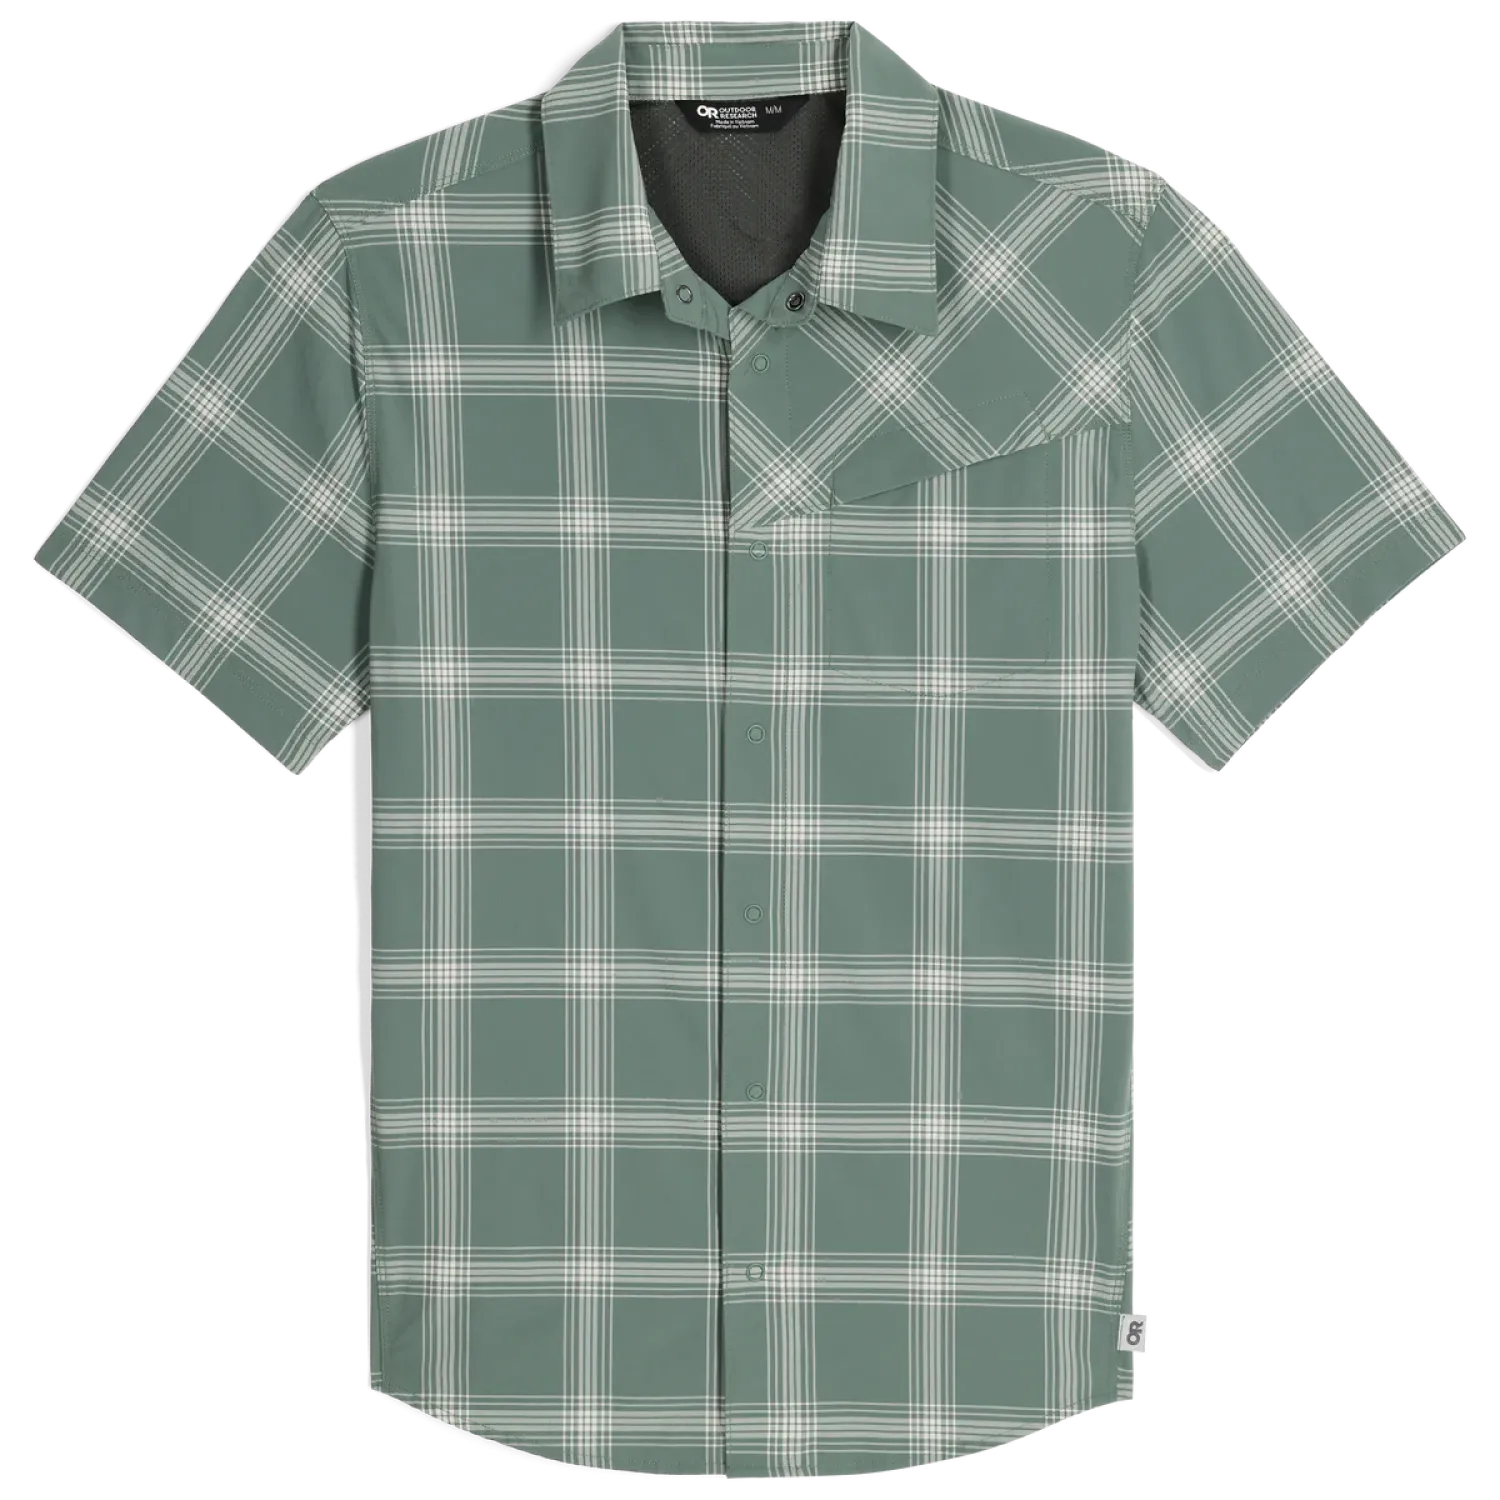 Outdoor Research Men's Astroman Short Sleeve Sun Shirt shown in the Balsam Plaid color option. Front view flat.